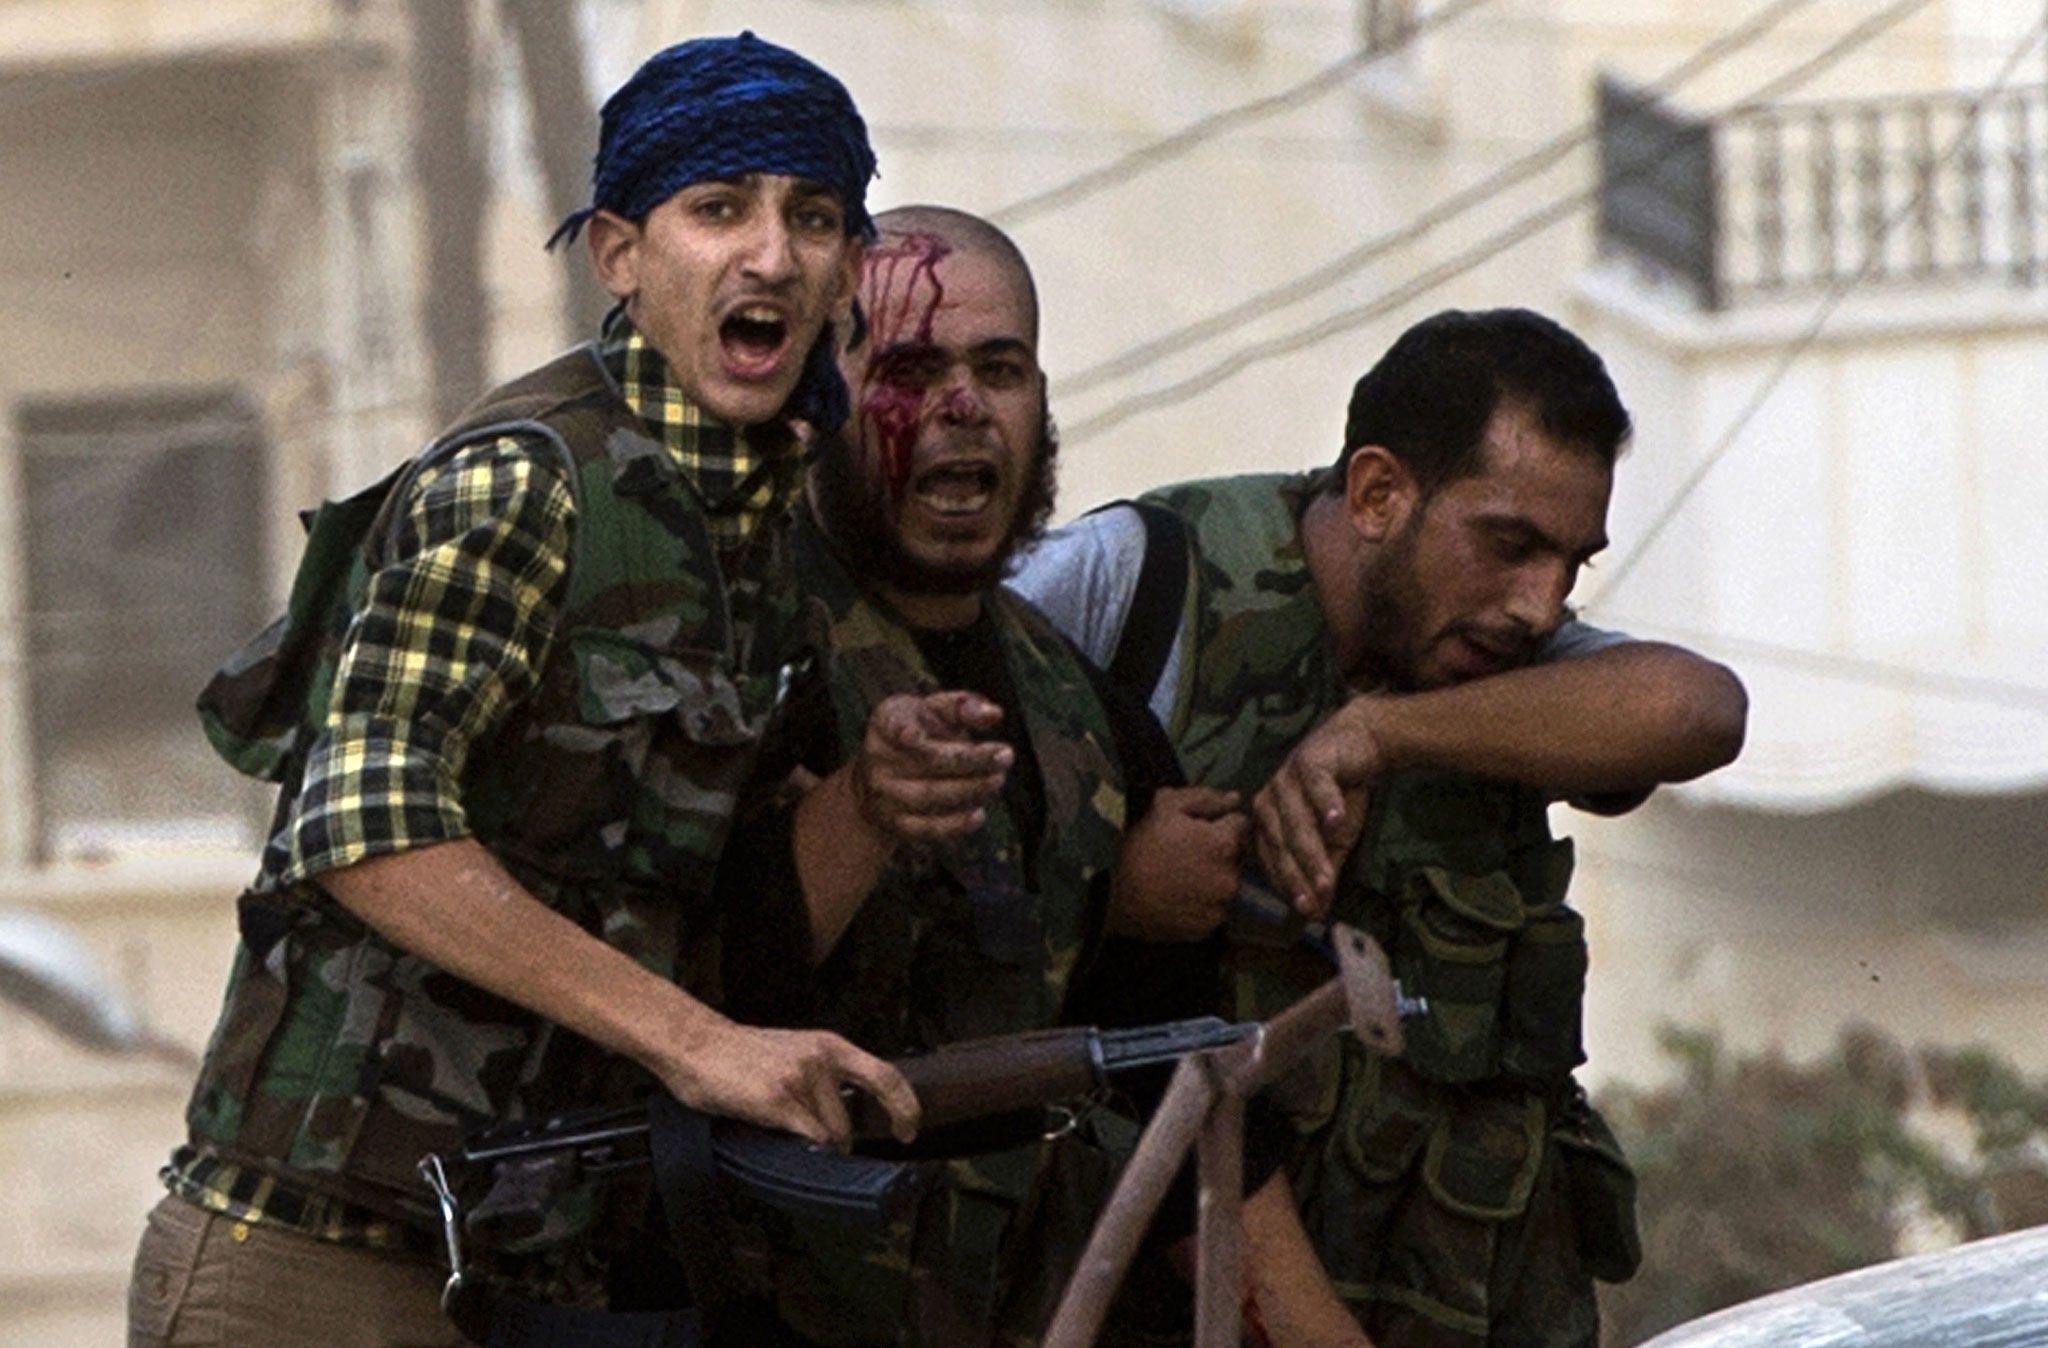 An injured rebel fighter is helped during heavy fighting with Syrian government troops